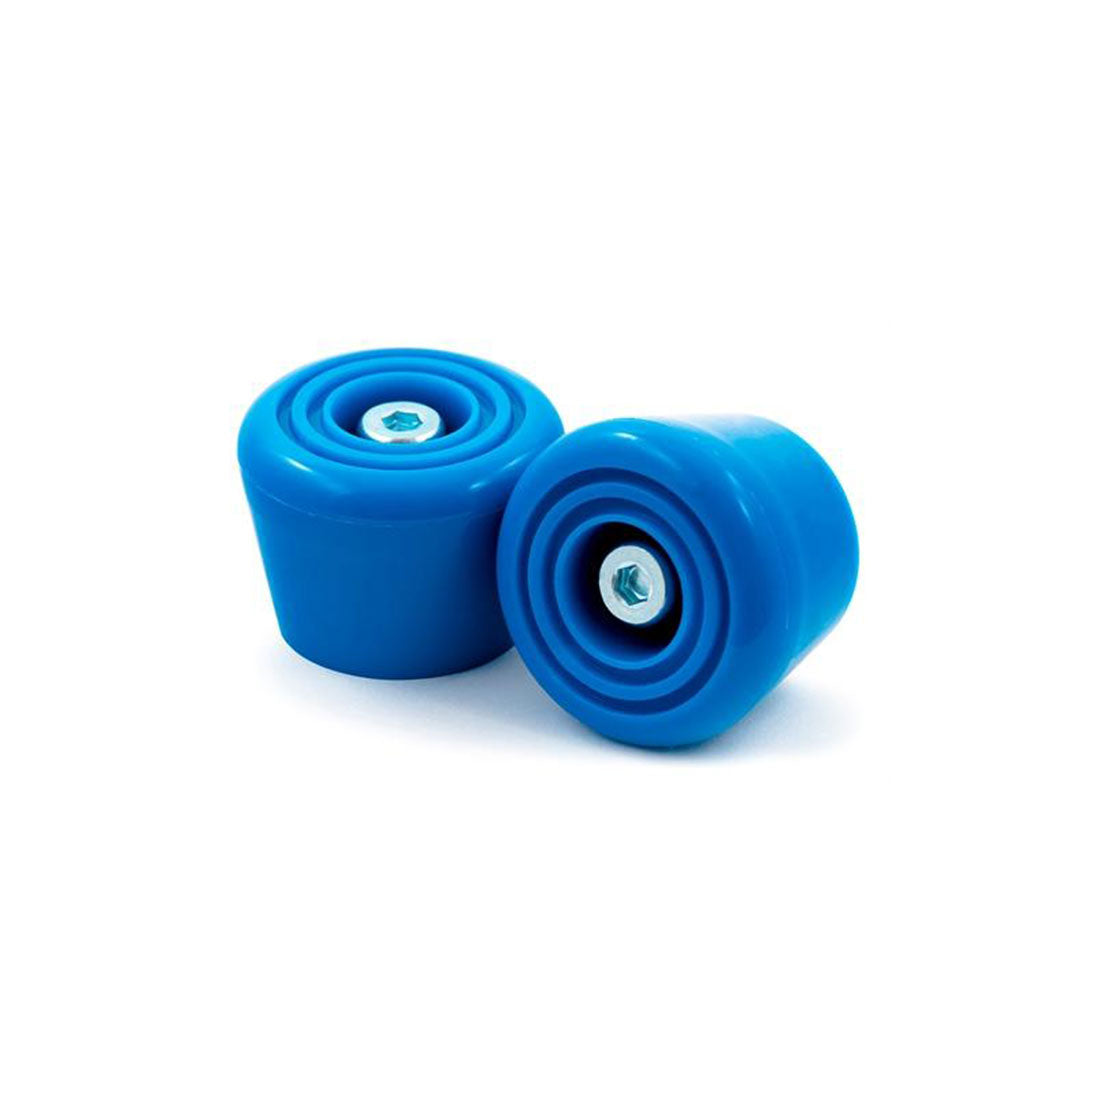 Rio Roller Toe Stops 2pk Blue Roller Skate Hardware and Parts